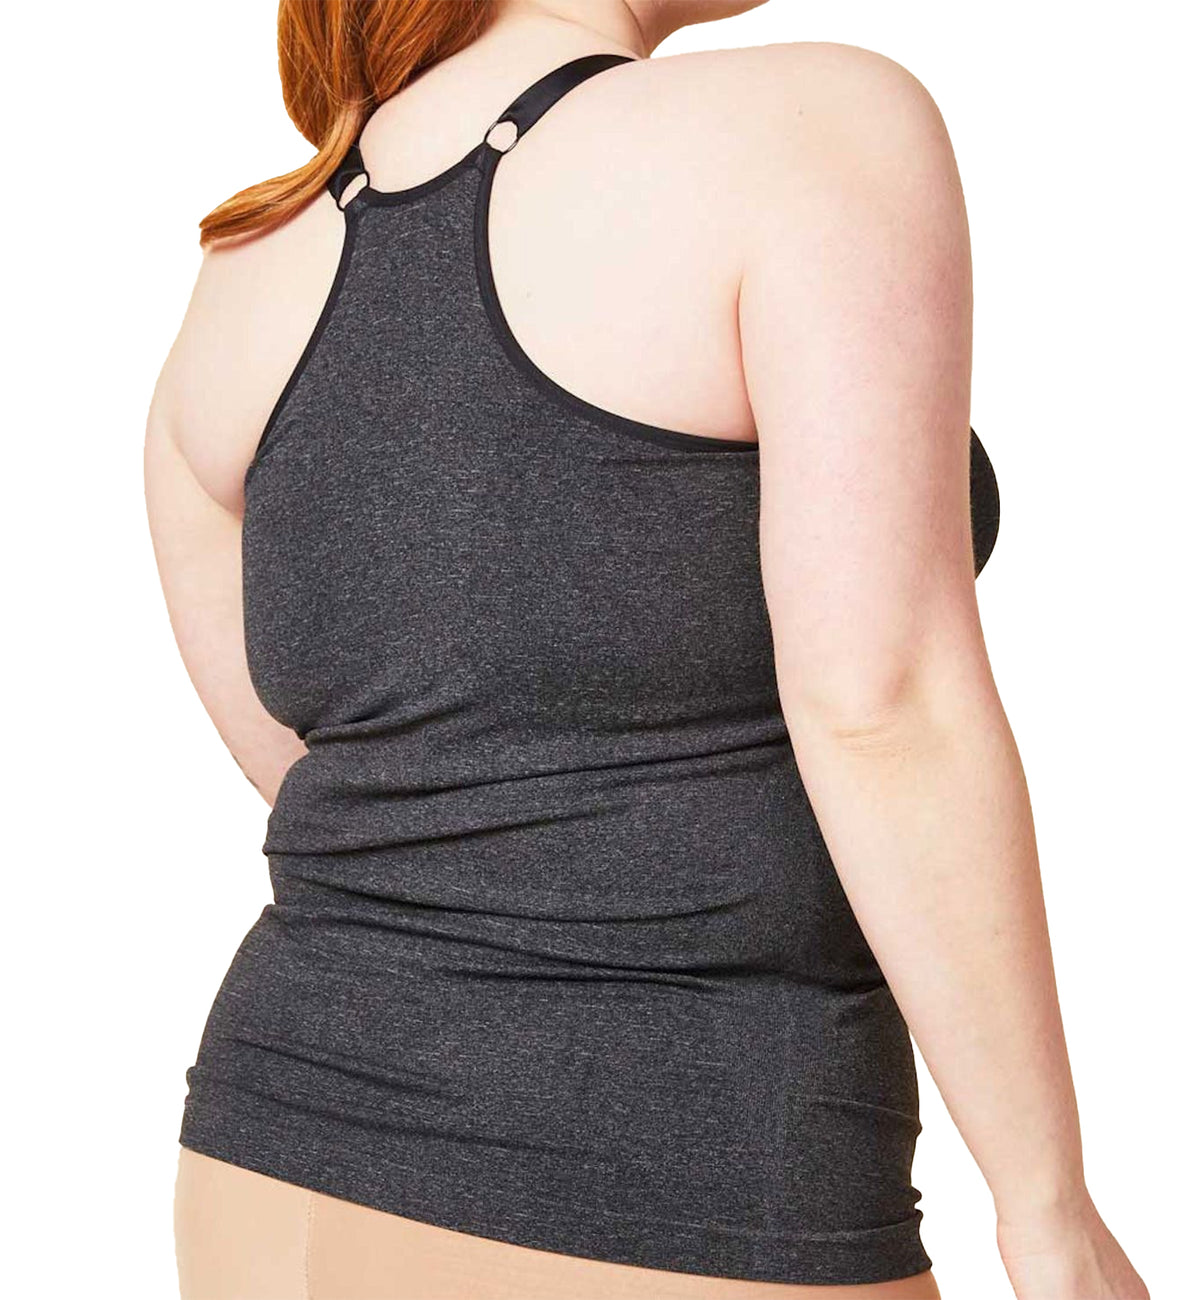 Sugar Candy by Cake Womens Fuller Bust Seamless Lounge Everyday Tank (41-8012),XS,Charcoal - Charcoal,XS